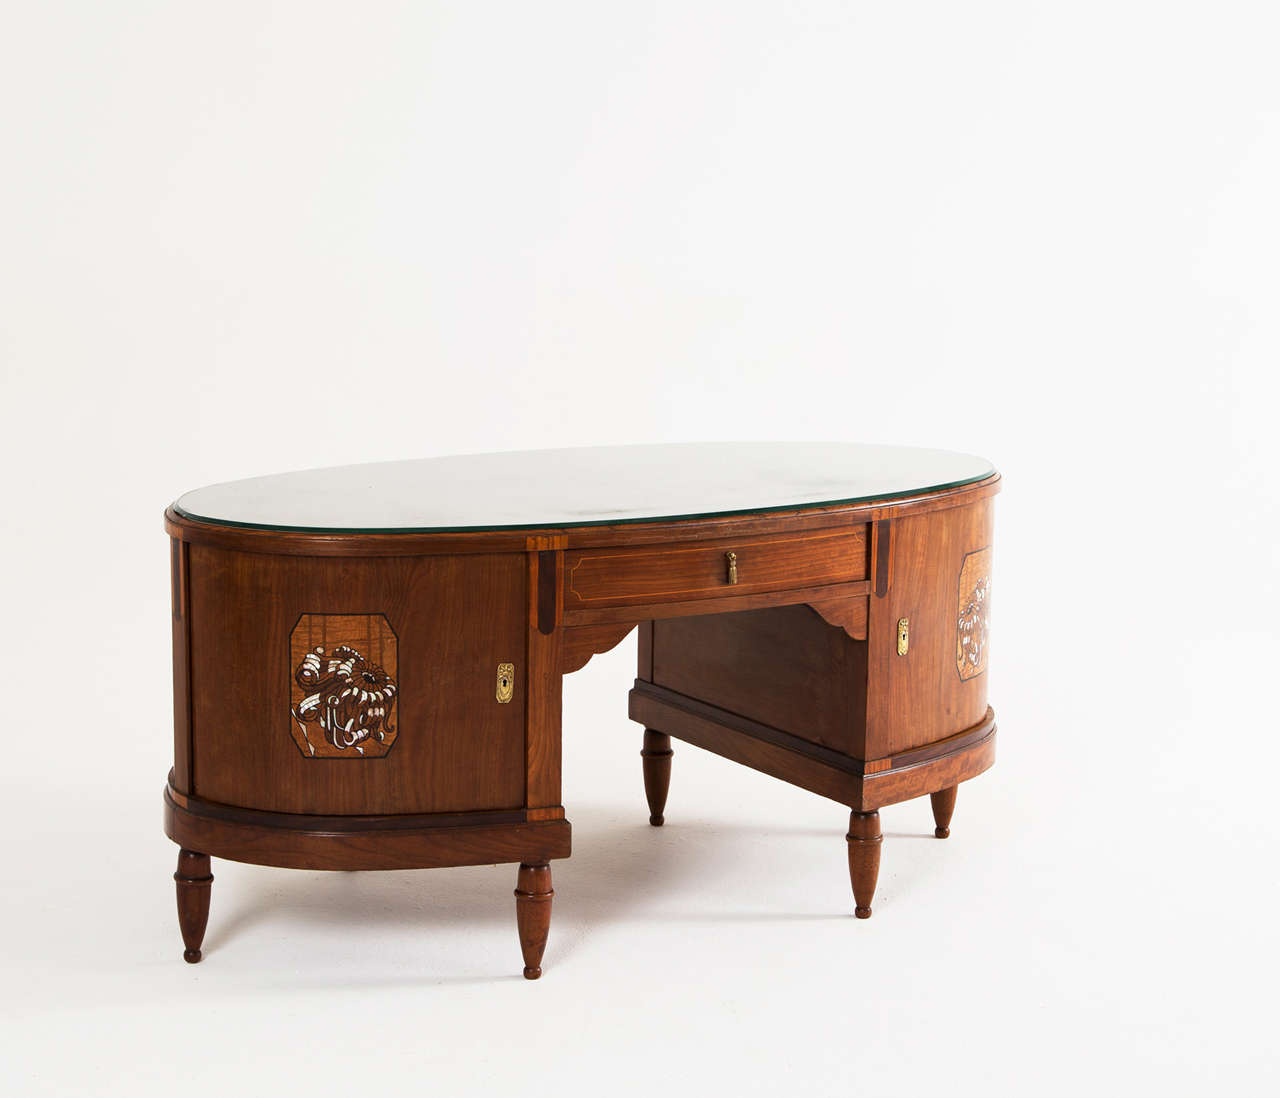 Desk, in mahogany, nacre and brass, France 1930s. 

Very sophisticated mahogany Art Deco executive desk. The front and back are identical, both equipped with a drawer and two curved doors. Each door has a beautifully made veneer and